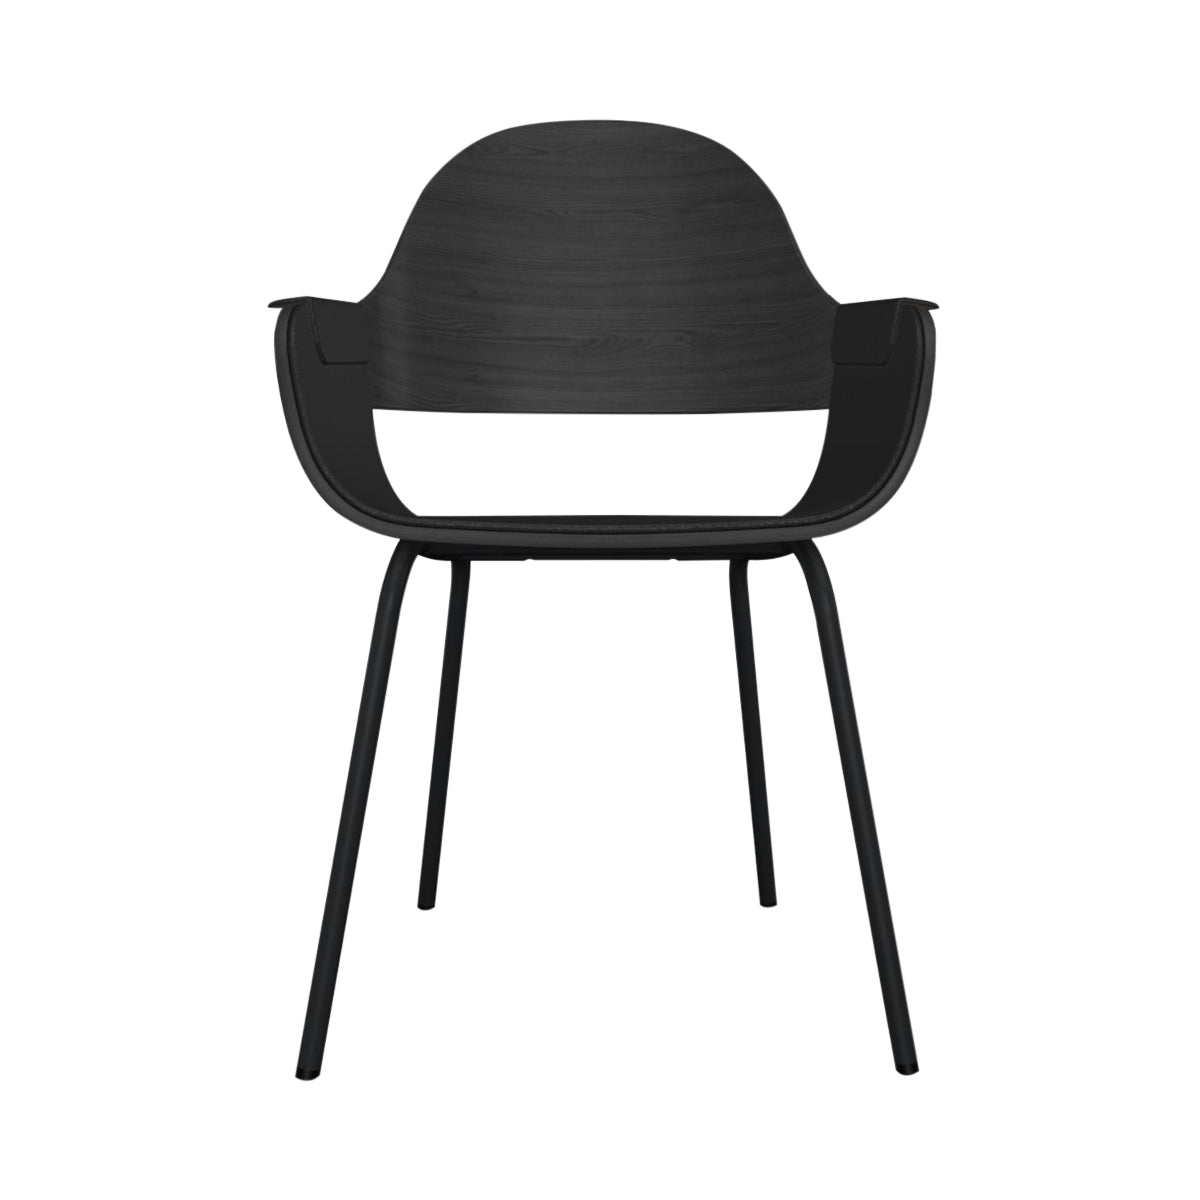 Showtime Nude Chair with Metal Base: Interior Seat + Armrest Upholstered + Ash Stained Black + Anthracite Grey